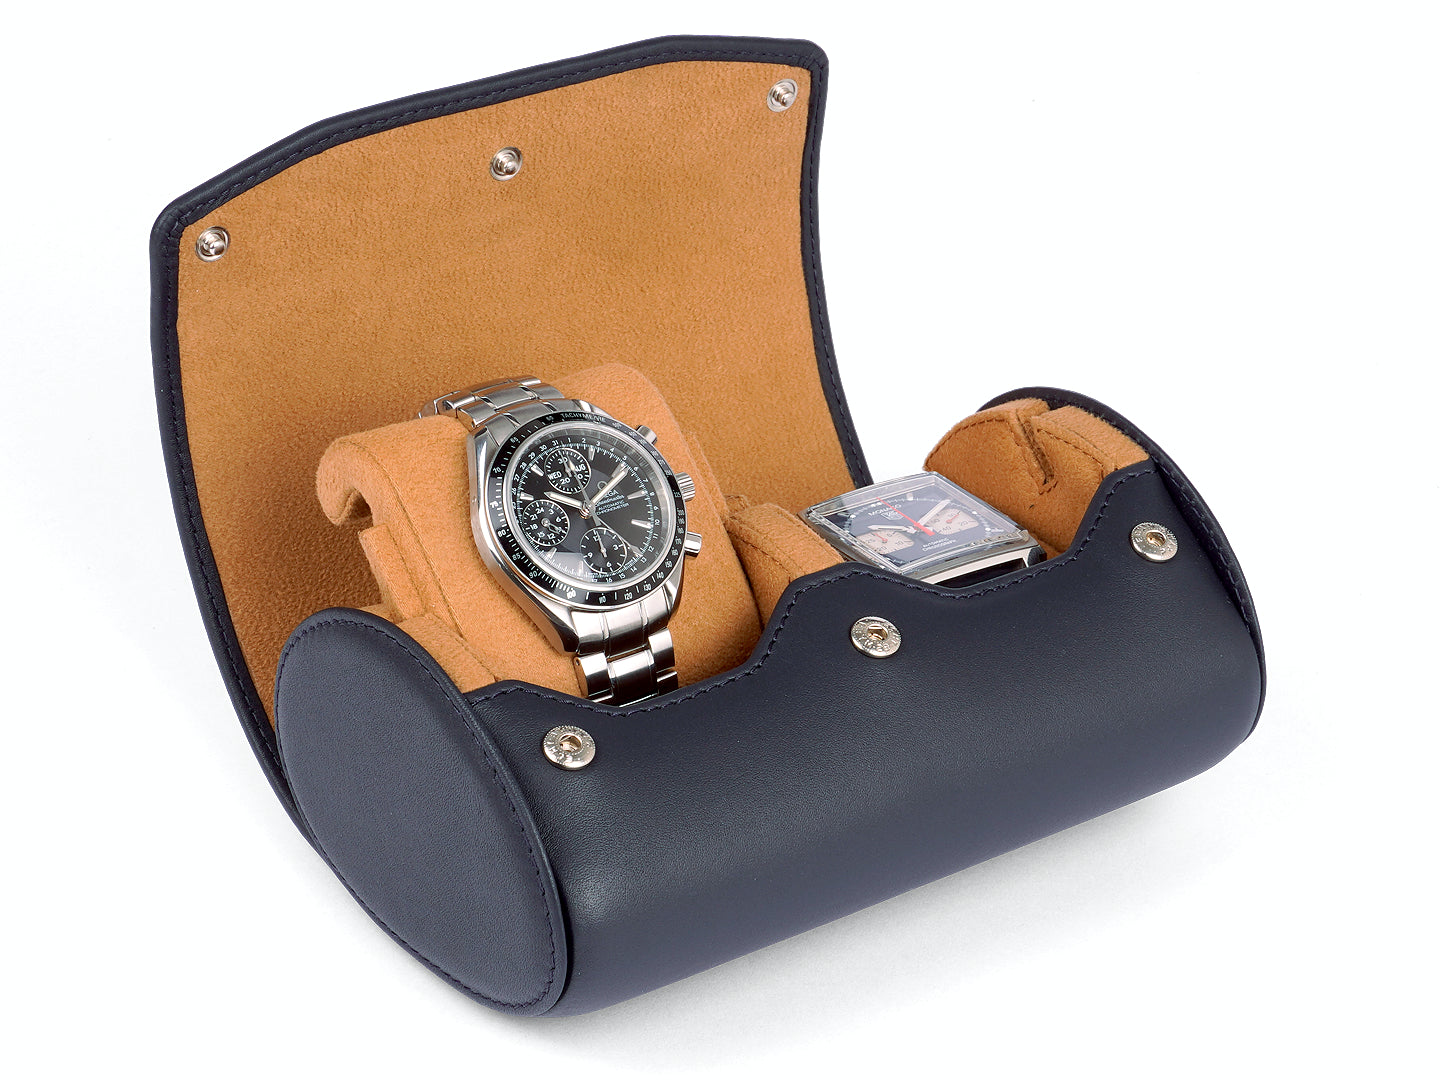 Watch Case For 2 Watches - Navy Blue - $192 - Free shipping